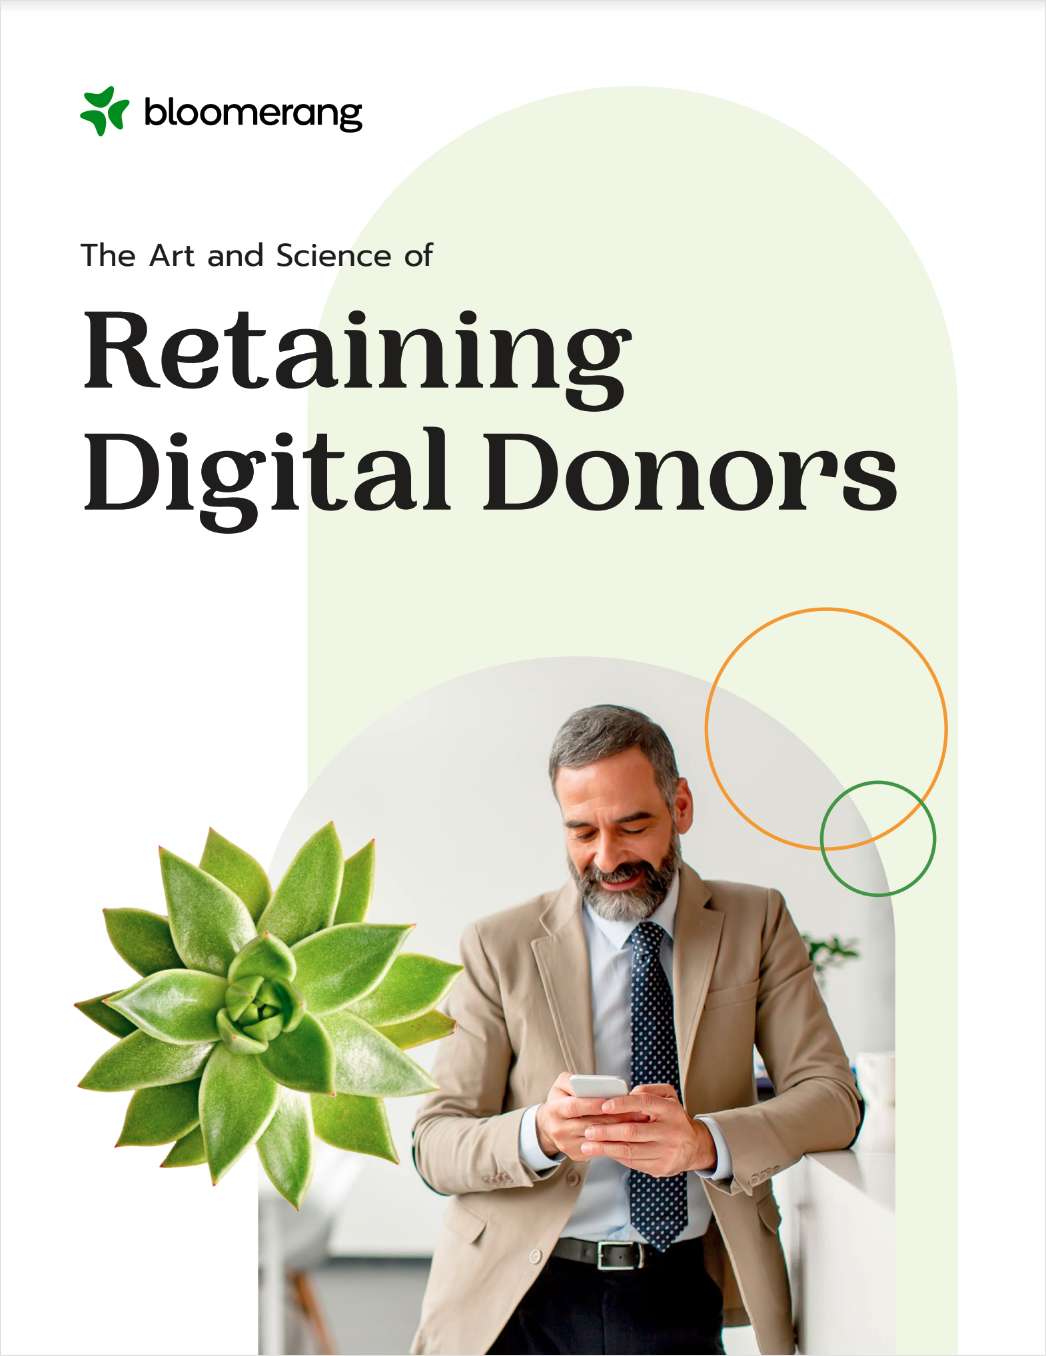 The Art and Science of Retaining Digital Donors